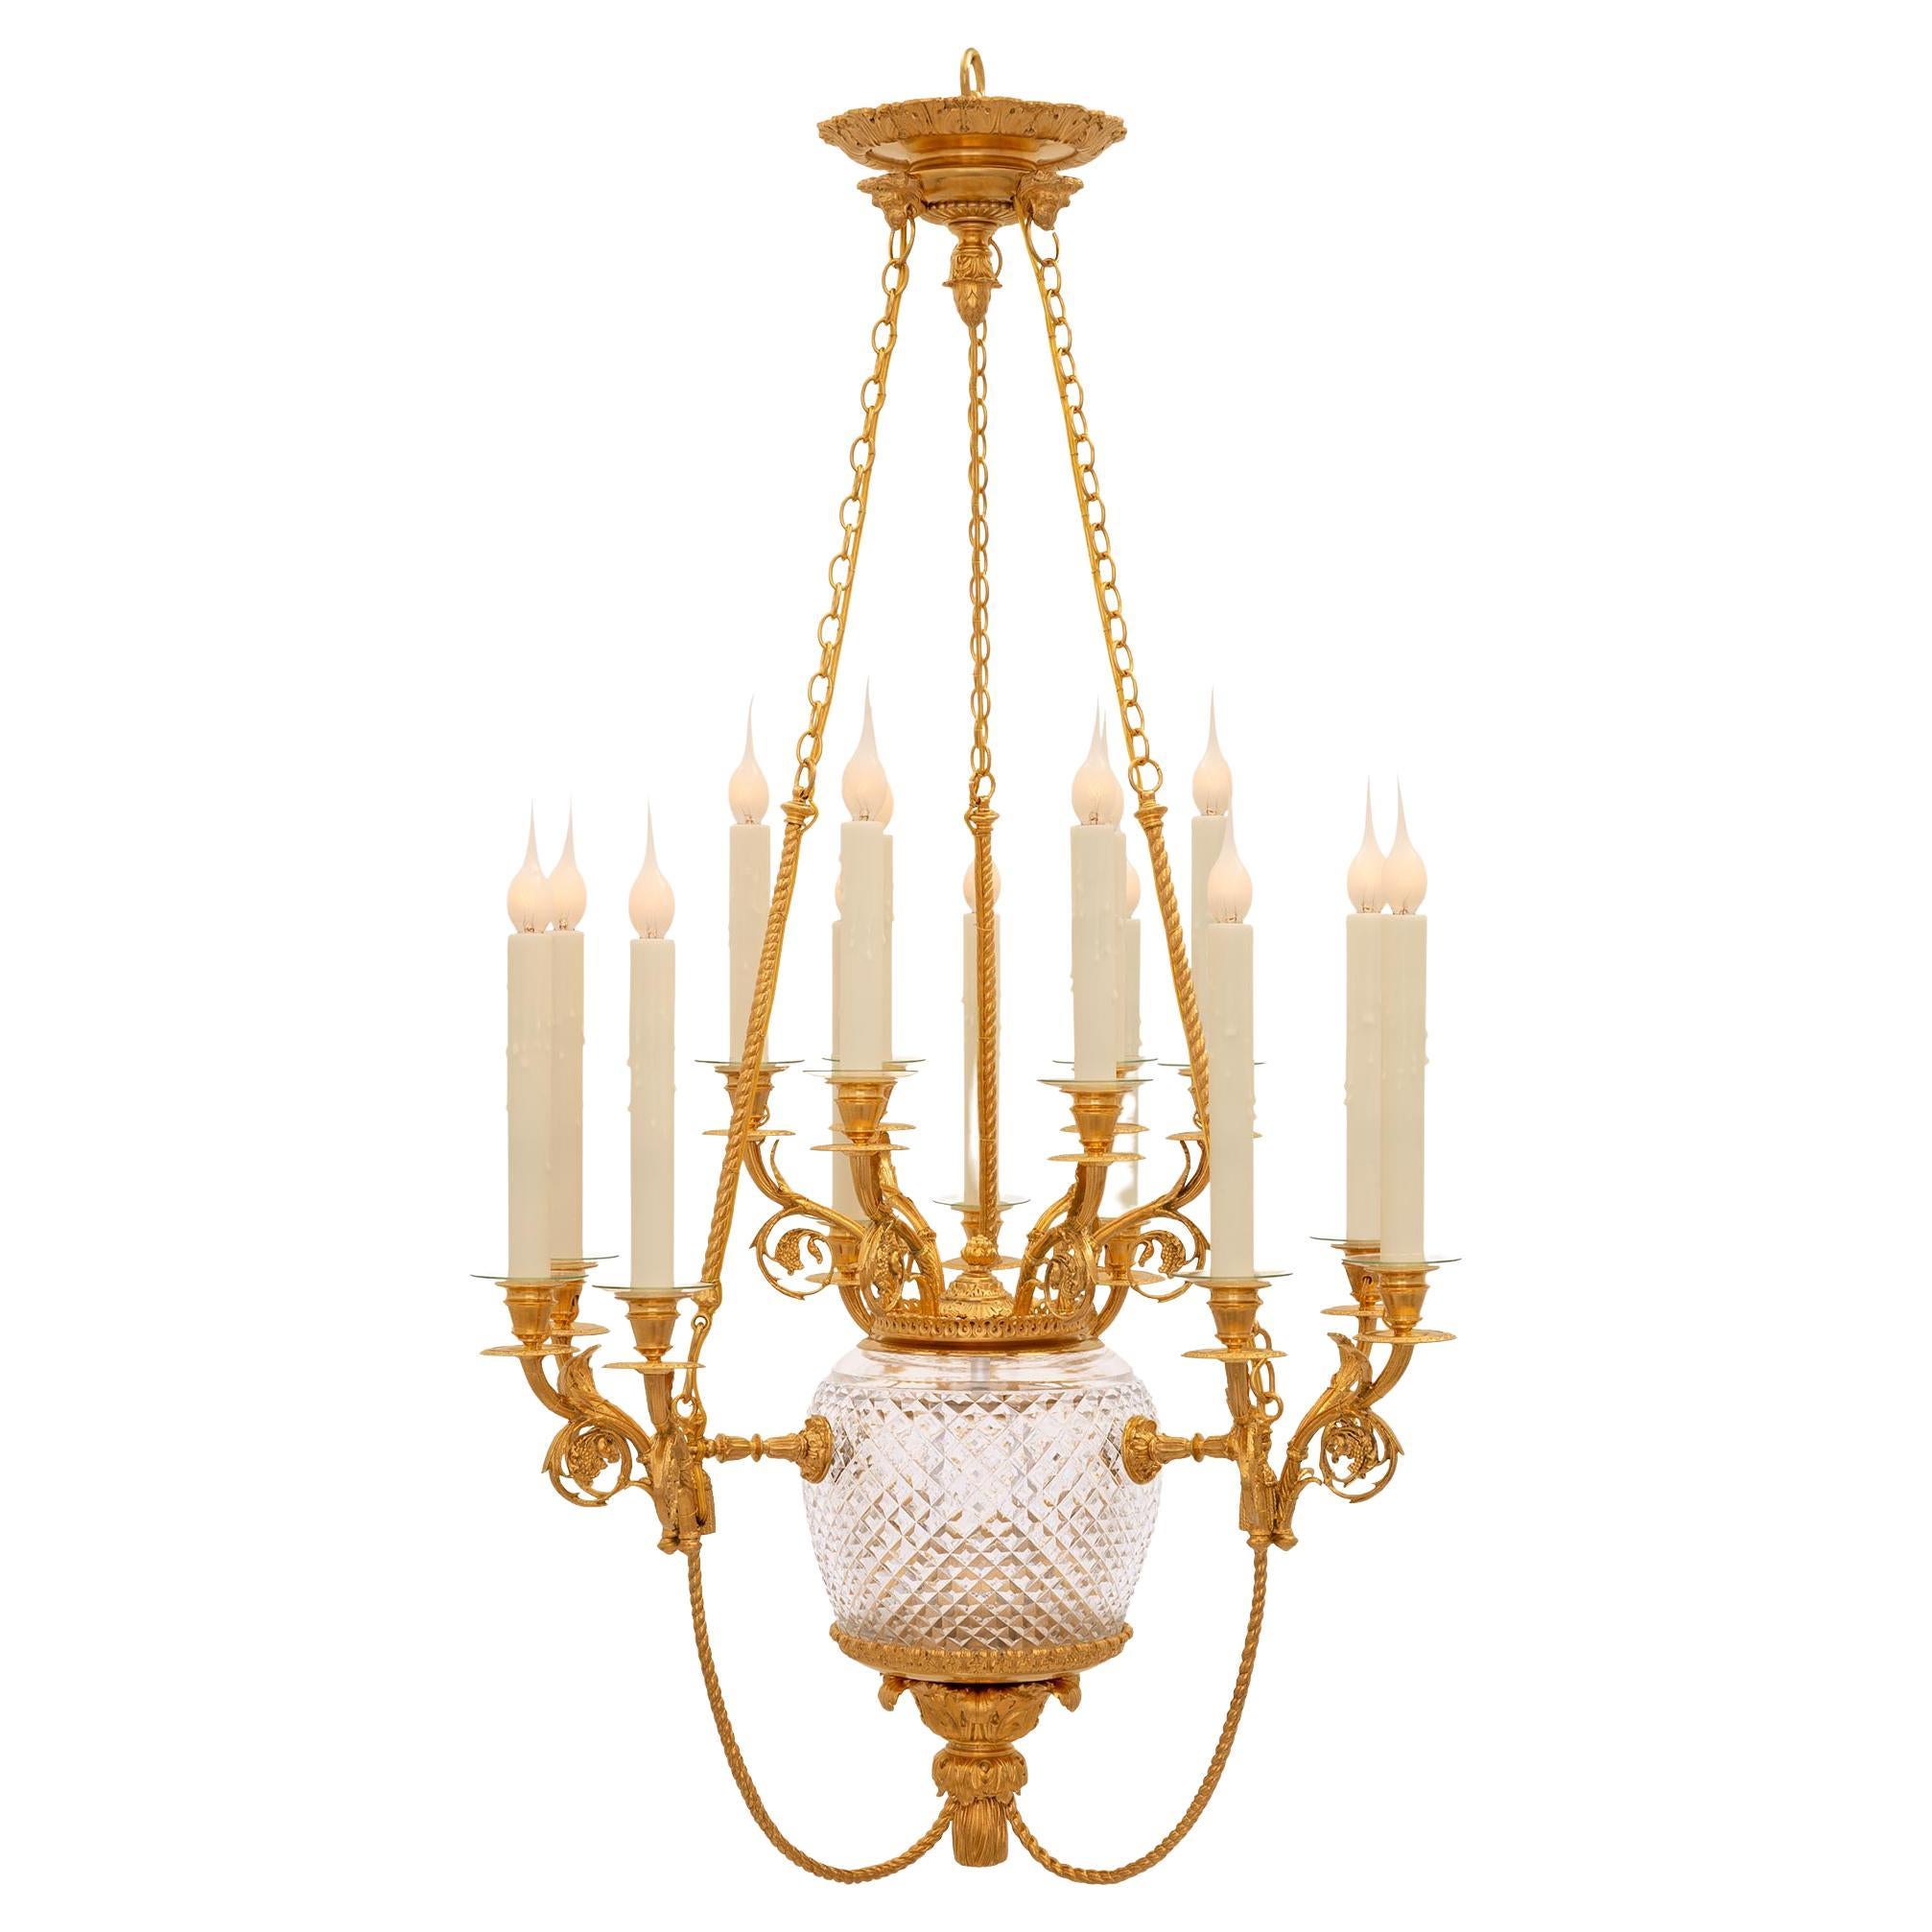 French 19th Century Louis XVI St. Baccarat Crystal and Ormolu Chandelier For Sale